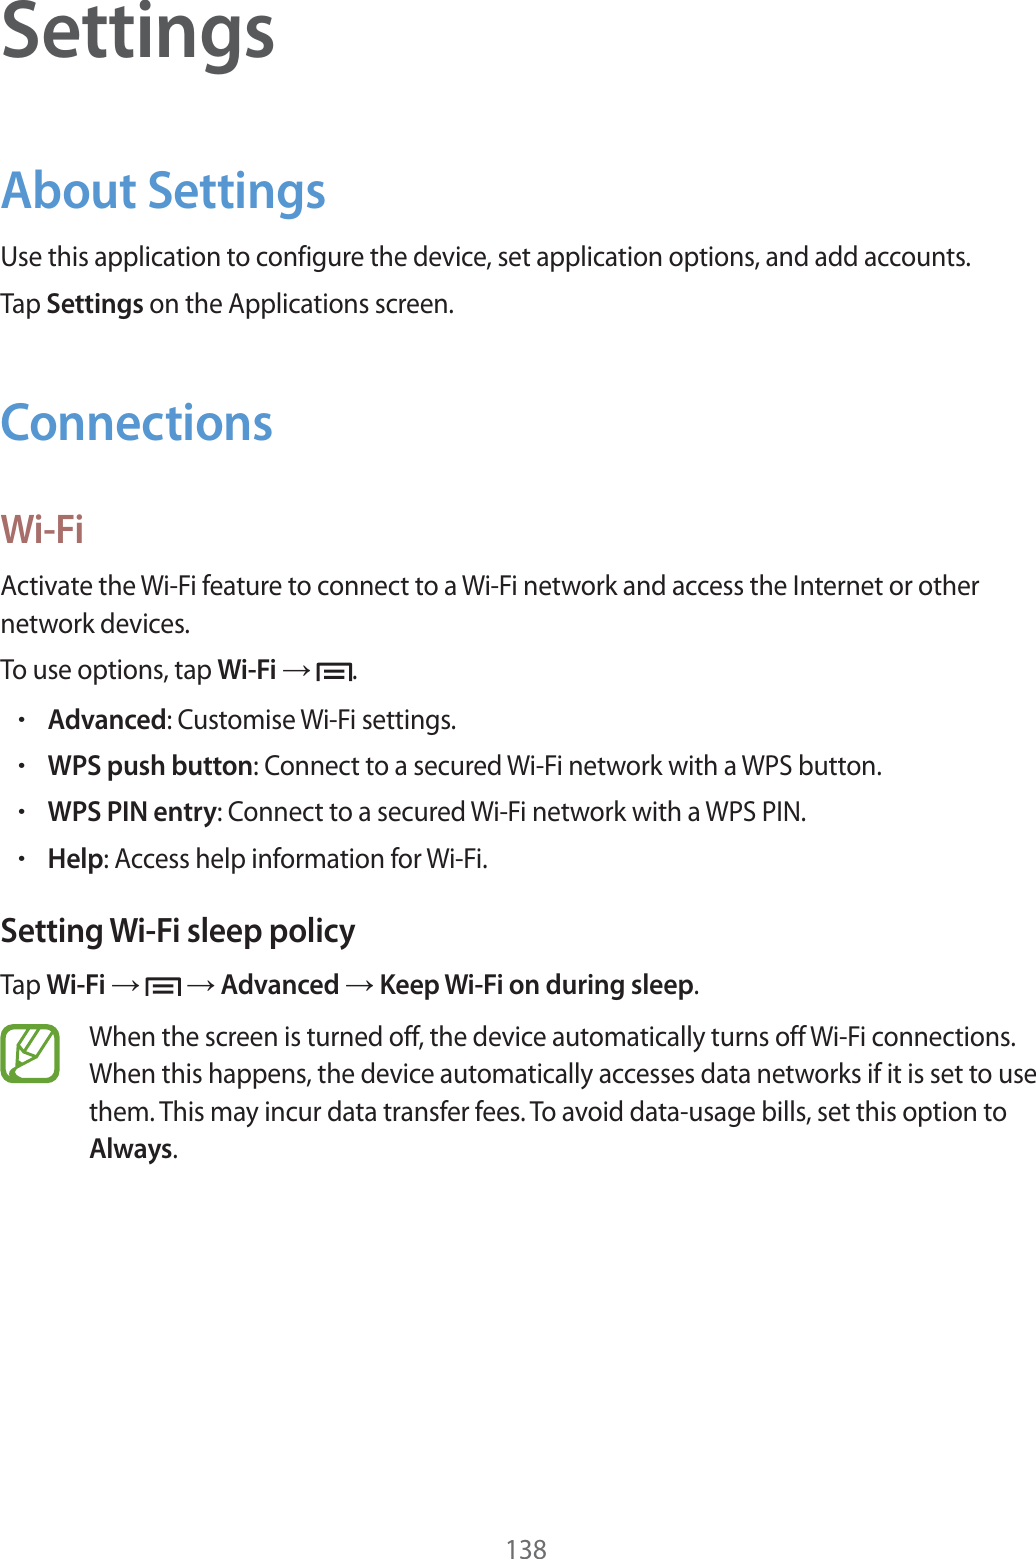 138SettingsAbout SettingsUse this application to configure the device, set application options, and add accounts.Tap Settings on the Applications screen.ConnectionsWi-FiActivate the Wi-Fi feature to connect to a Wi-Fi network and access the Internet or other network devices.To use options, tap Wi-Fi   .rAdvanced: Customise Wi-Fi settings.rWPS push button: Connect to a secured Wi-Fi network with a WPS button.rWPS PIN entry: Connect to a secured Wi-Fi network with a WPS PIN.rHelp: Access help information for Wi-Fi.Setting Wi-Fi sleep policyTap Wi-Fi     Advanced  Keep Wi-Fi on during sleep.When the screen is turned off, the device automatically turns off Wi-Fi connections. When this happens, the device automatically accesses data networks if it is set to use them. This may incur data transfer fees. To avoid data-usage bills, set this option to Always.